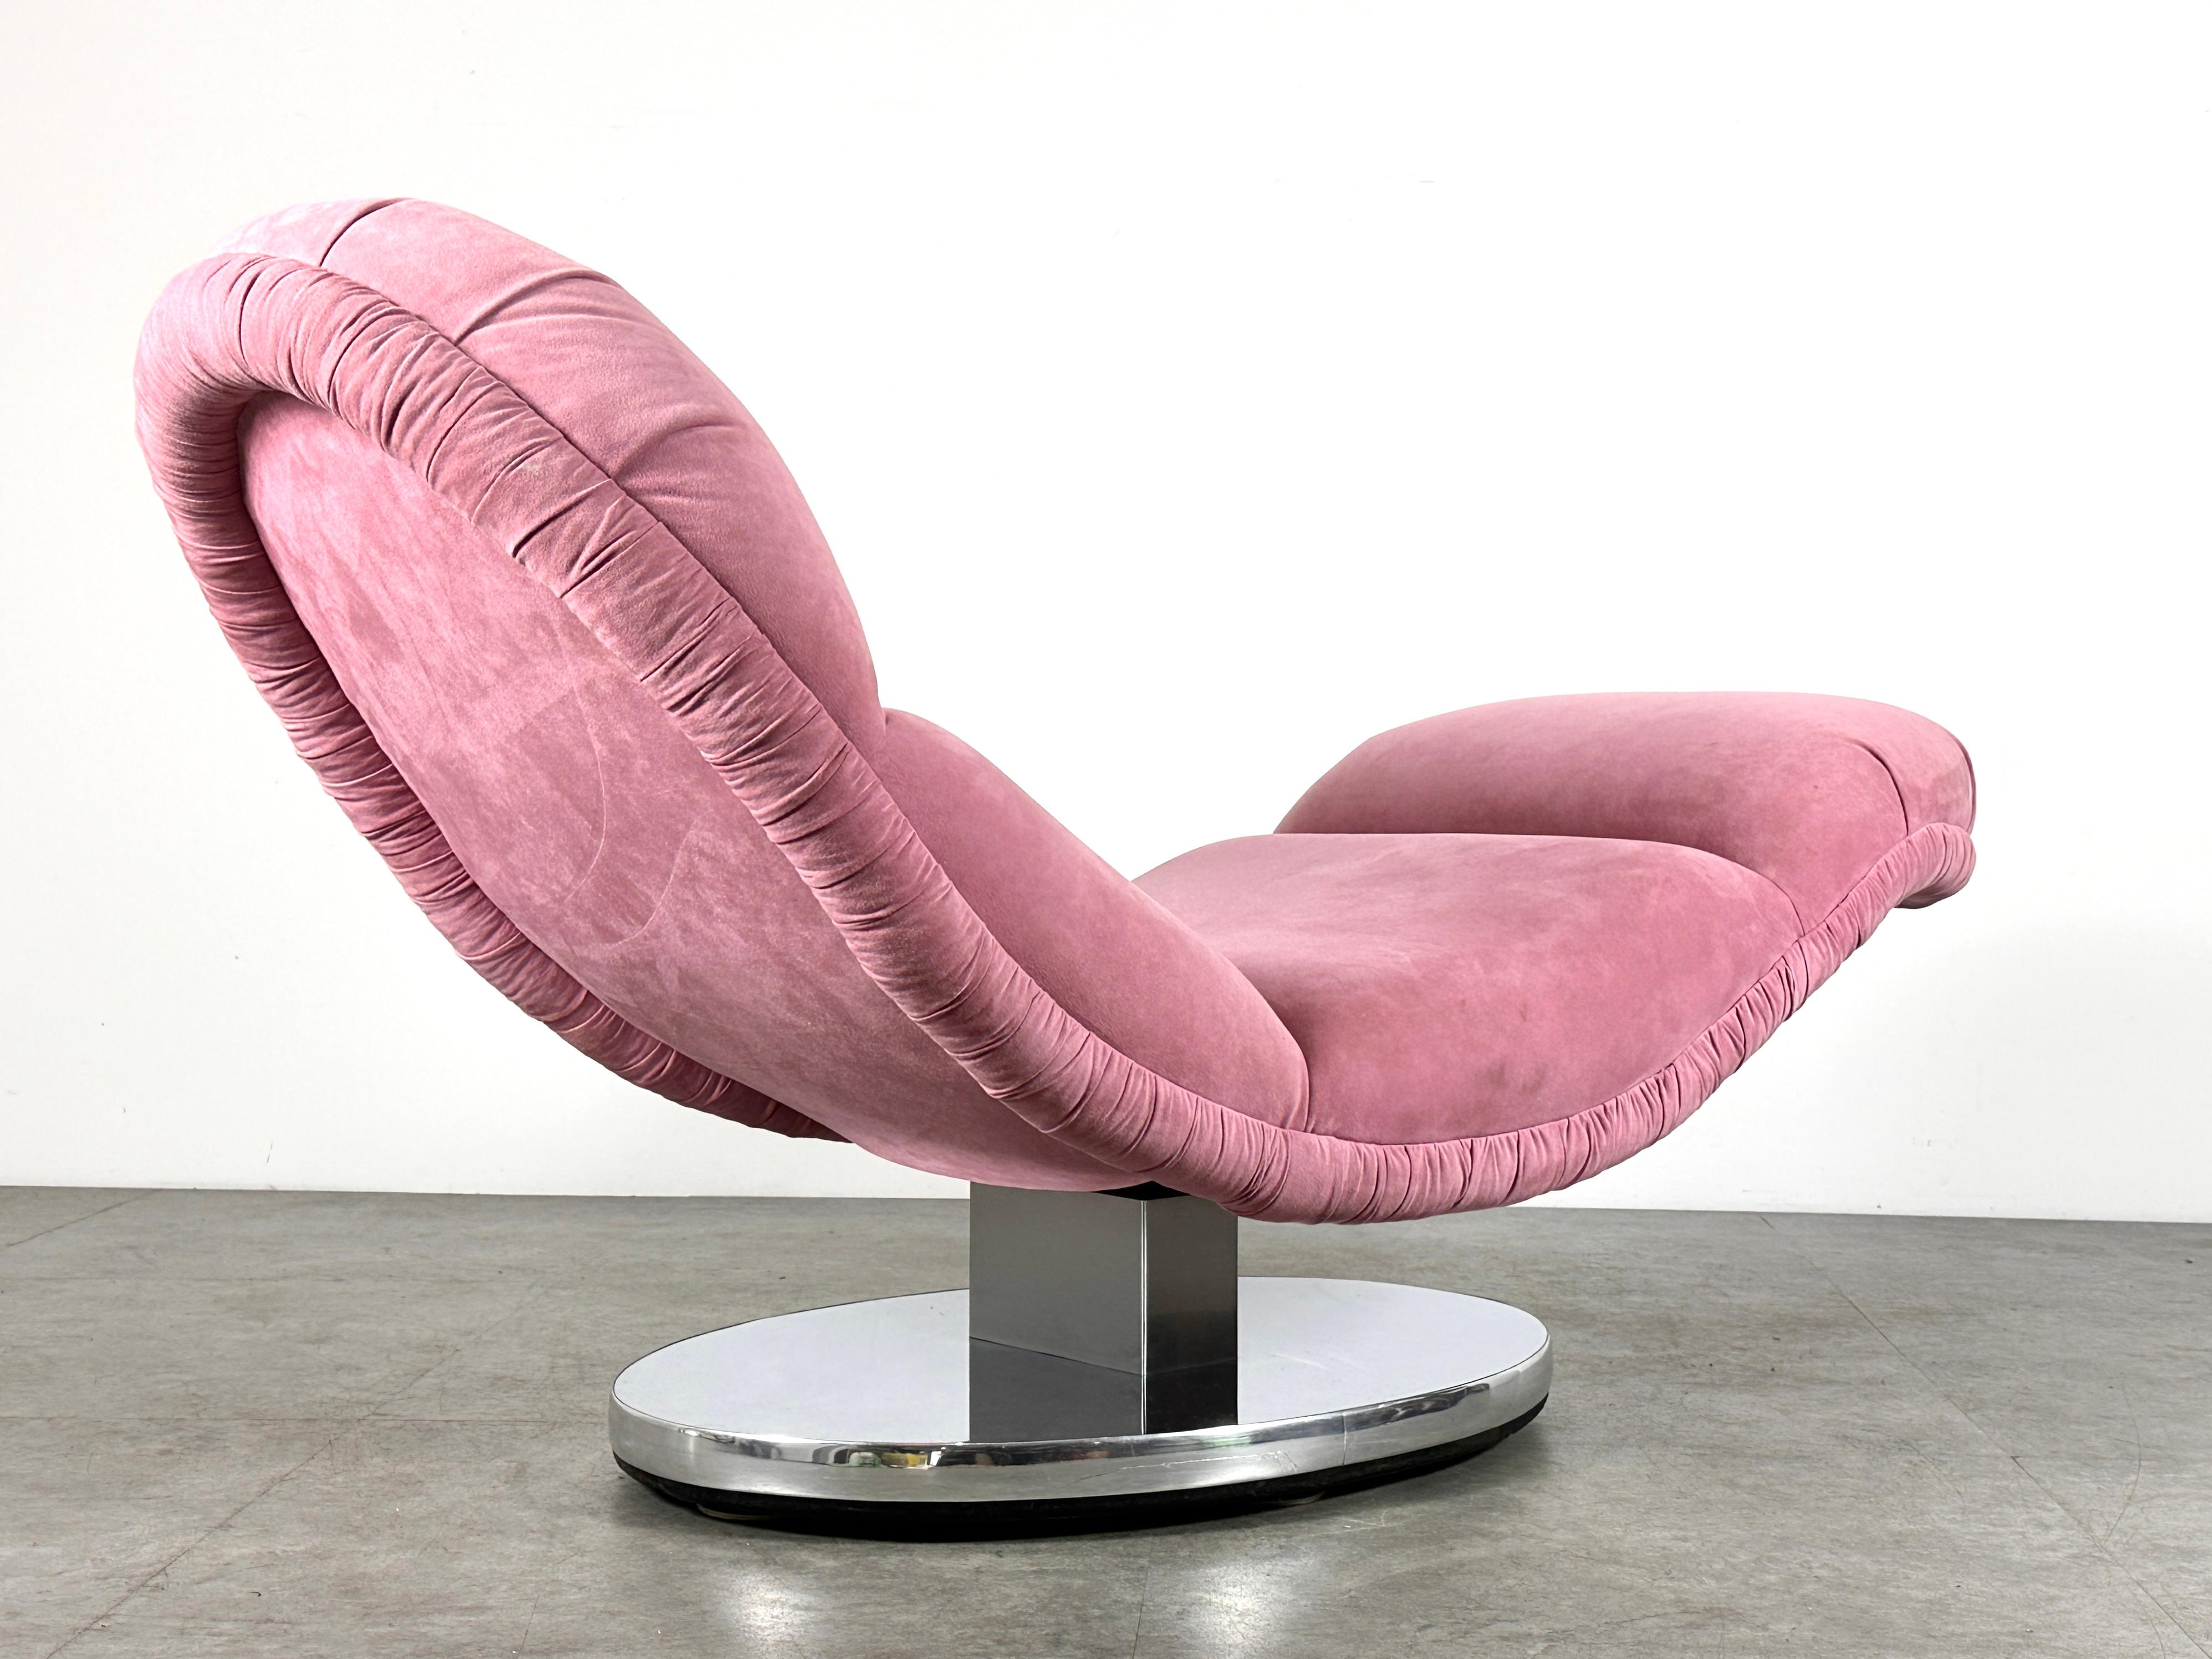 Milo Baughman for Thayer Coggin rocking wave chaise lounge chair on oval chrome base.
Pink microsuede upholstery with original labels.
Measures: 60